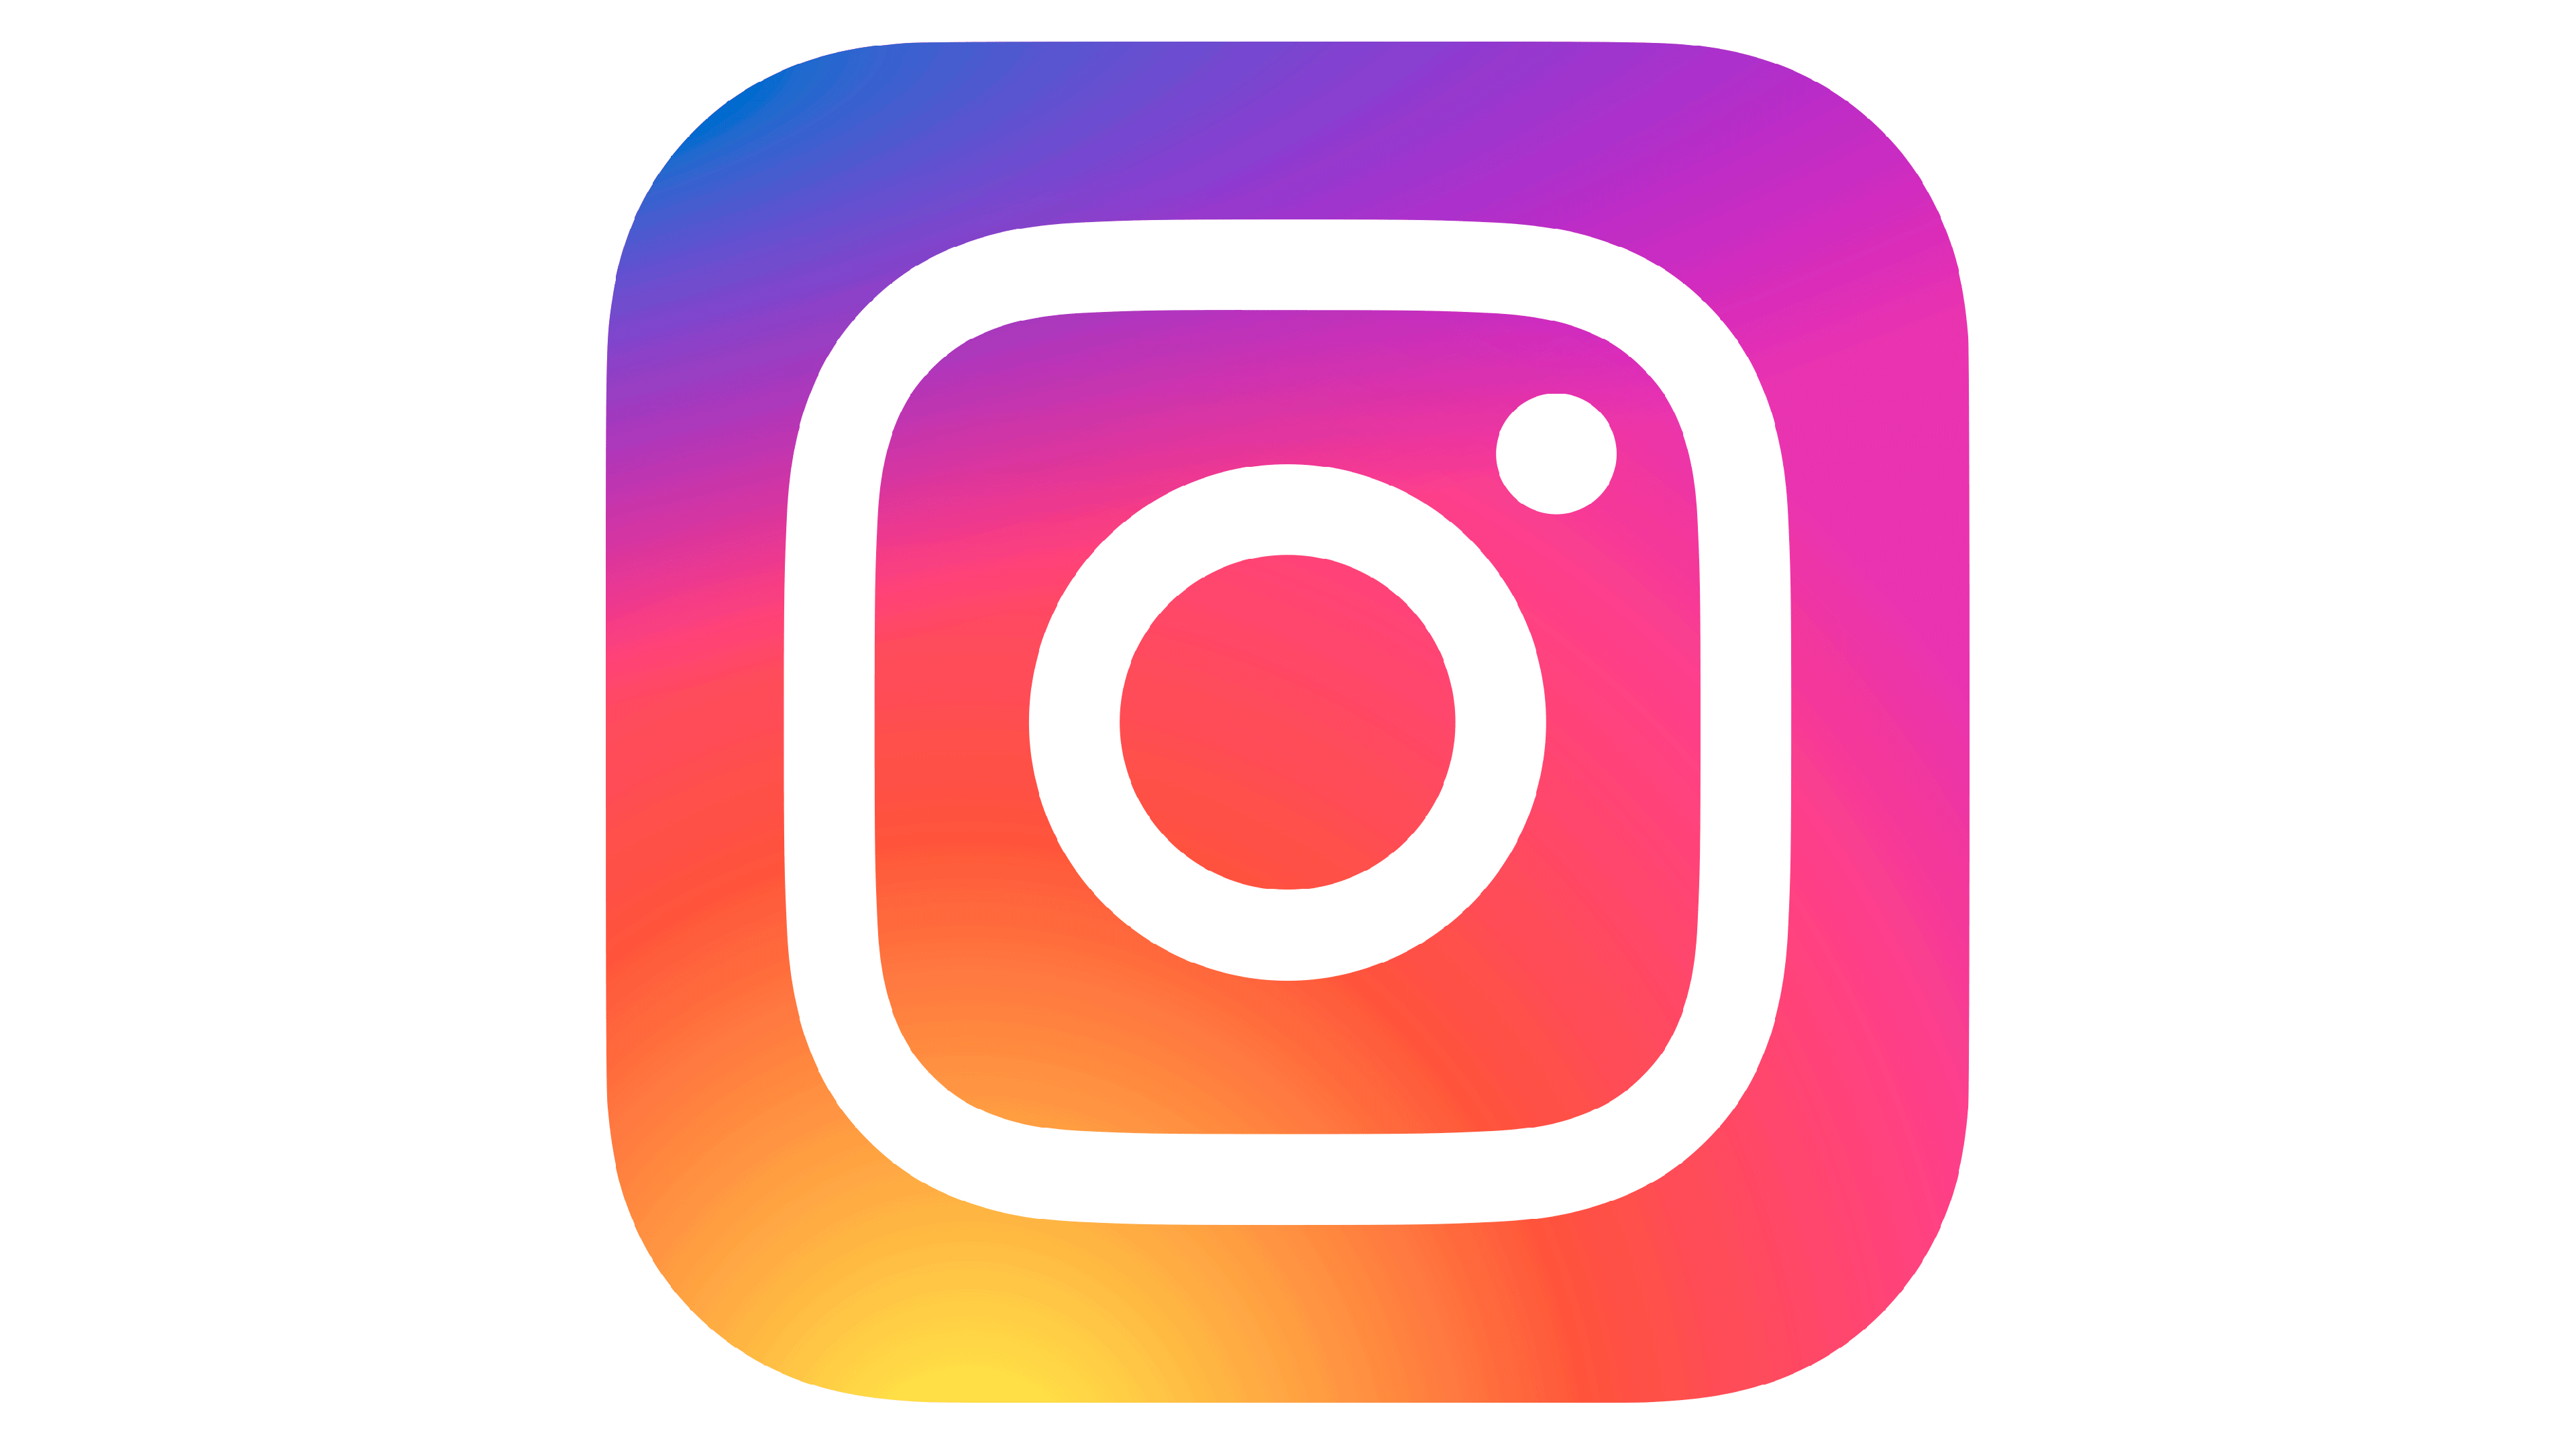 Instagram Logo and symbol, meaning, history, sign.